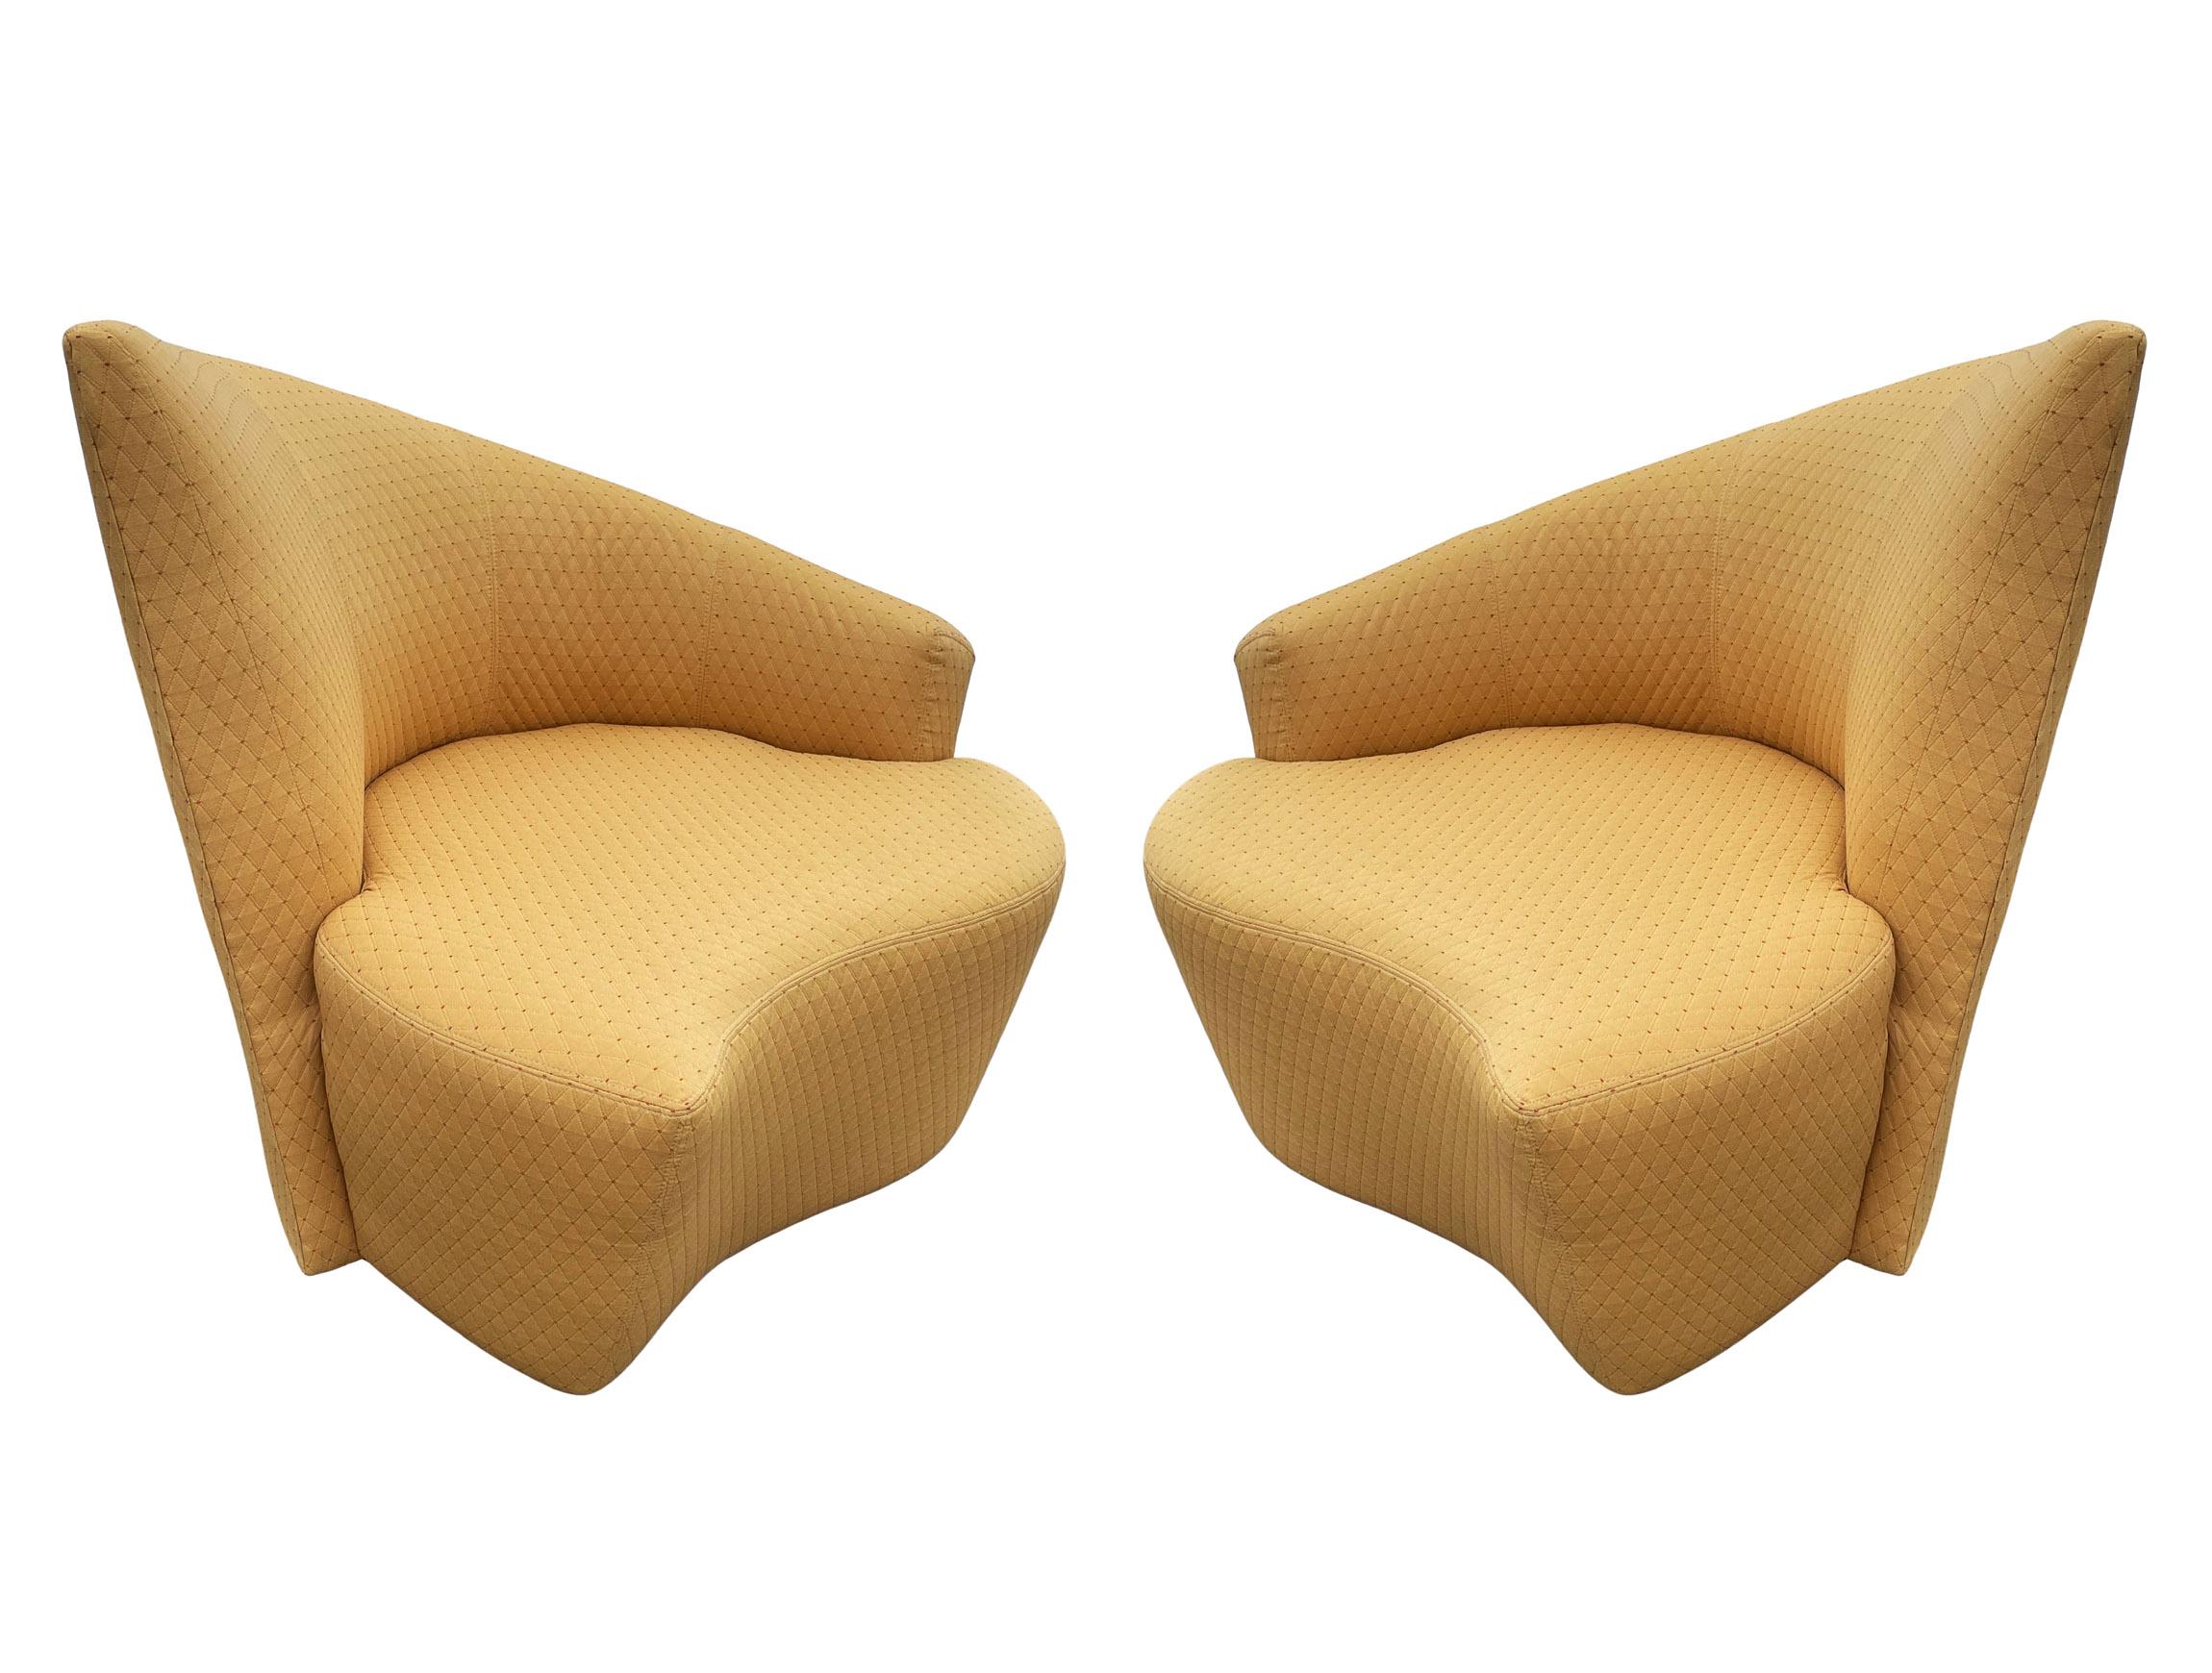 American Mid-Century Modern Pair of Slipper Swivel Lounge Chairs by Preview